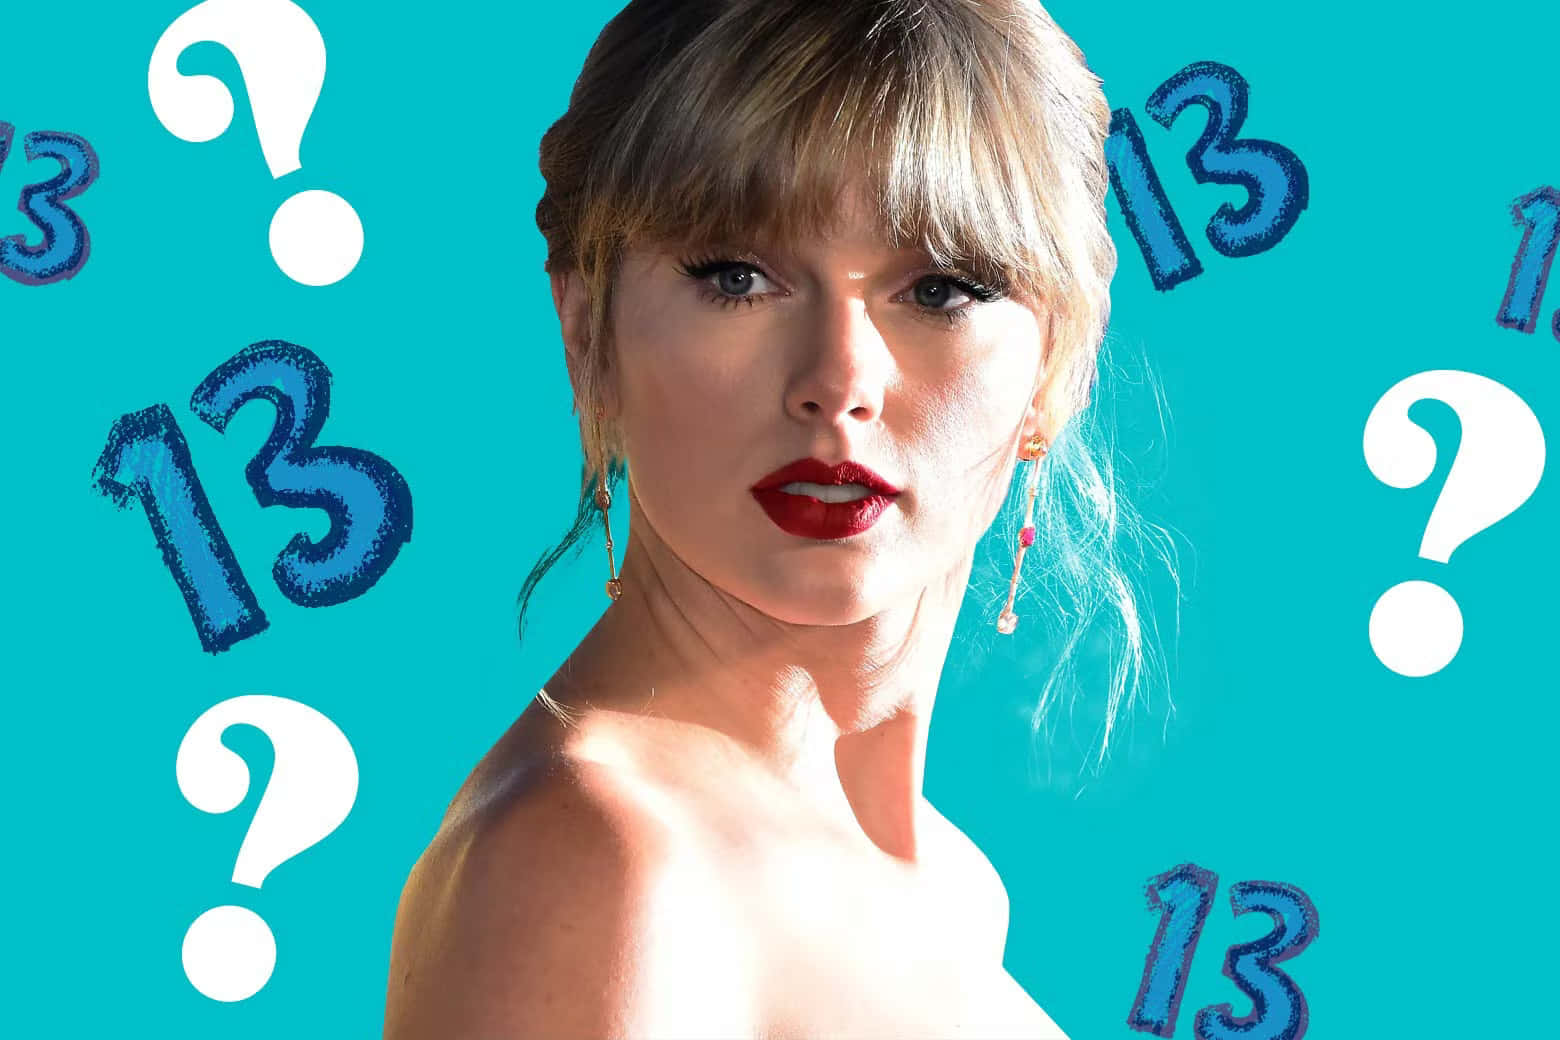 taylor swift pictures no background